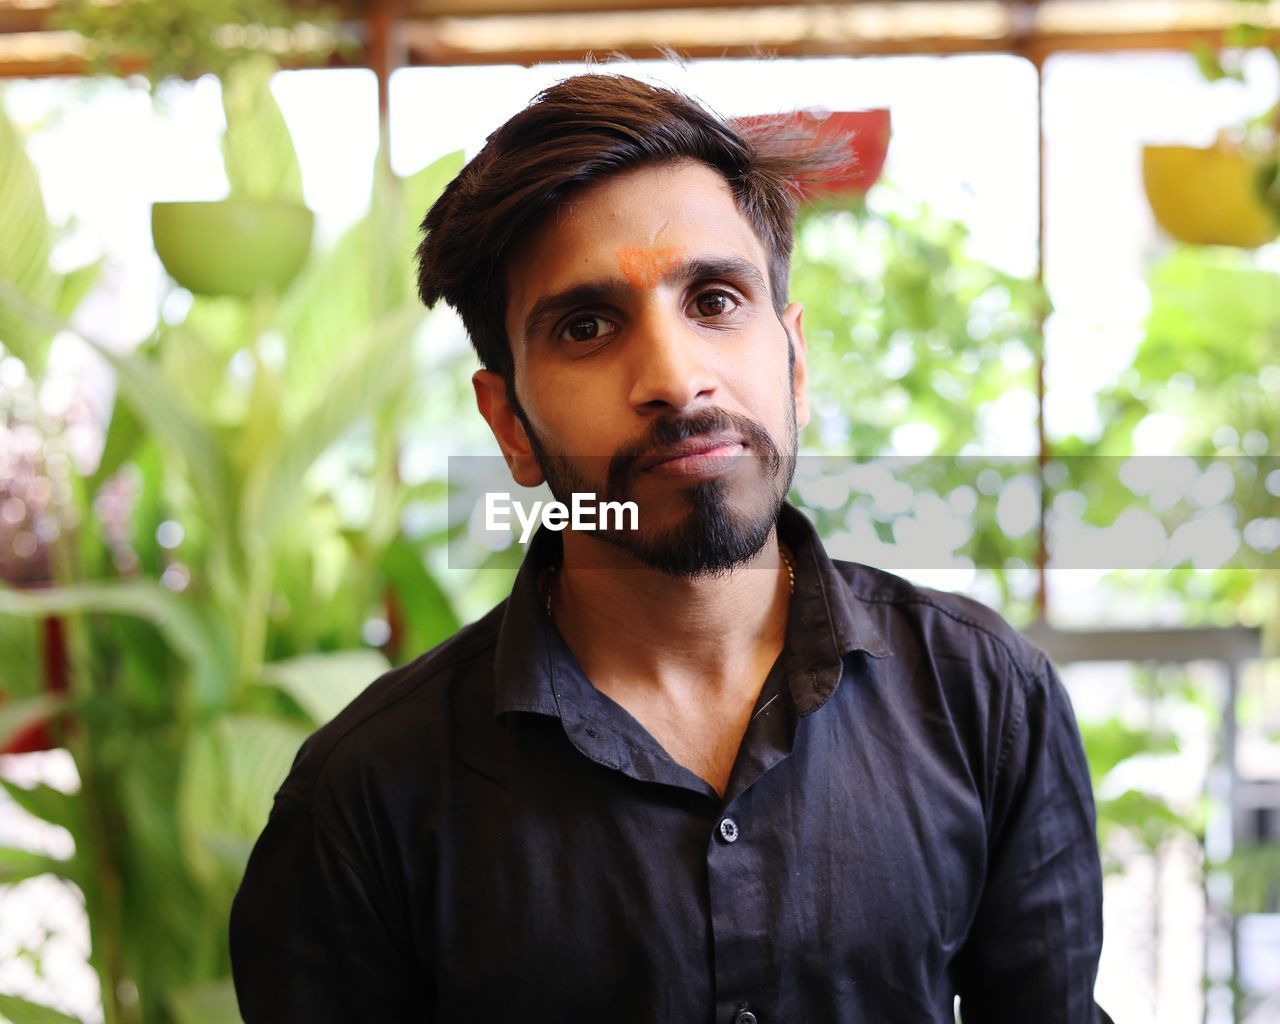 one person, adult, beard, portrait, facial hair, men, person, young adult, headshot, nature, looking at camera, clothing, casual clothing, plant, front view, flower, lifestyles, looking, human face, day, outdoors, standing, spring, occupation, waist up, contemplation, emotion, serious, individuality, focus on foreground